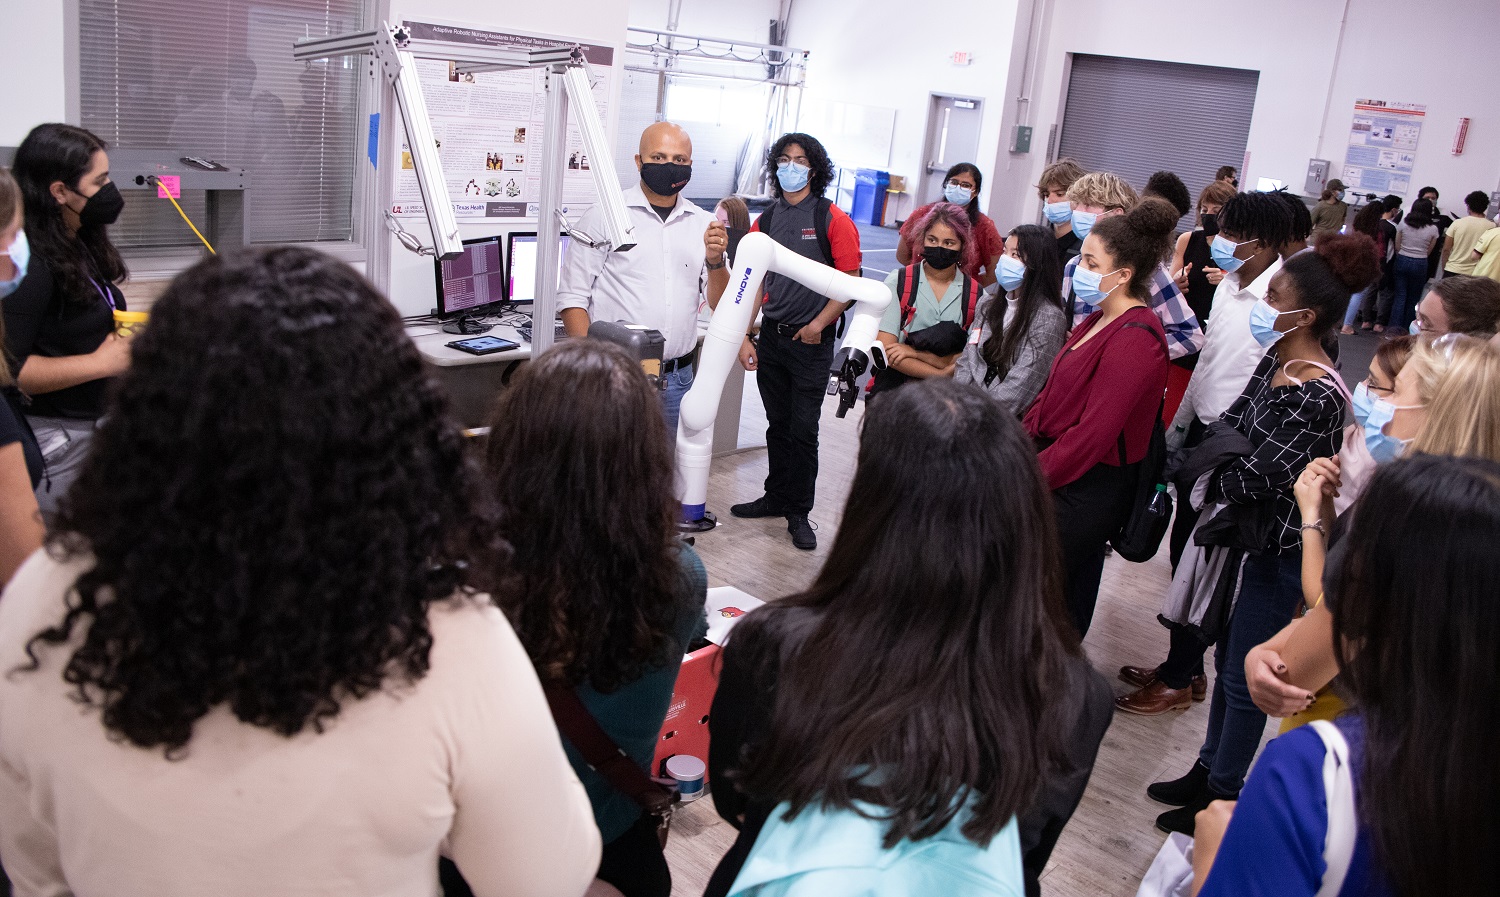 The robot Tiago is introduced to students at UofL’s Louisville Automation and Robotics Research Institute, known as LARRI. LARRI and two other facilities at UofL will use new federal funding to procure additional robotic technology and introduce that technology to students, trainees and workers.